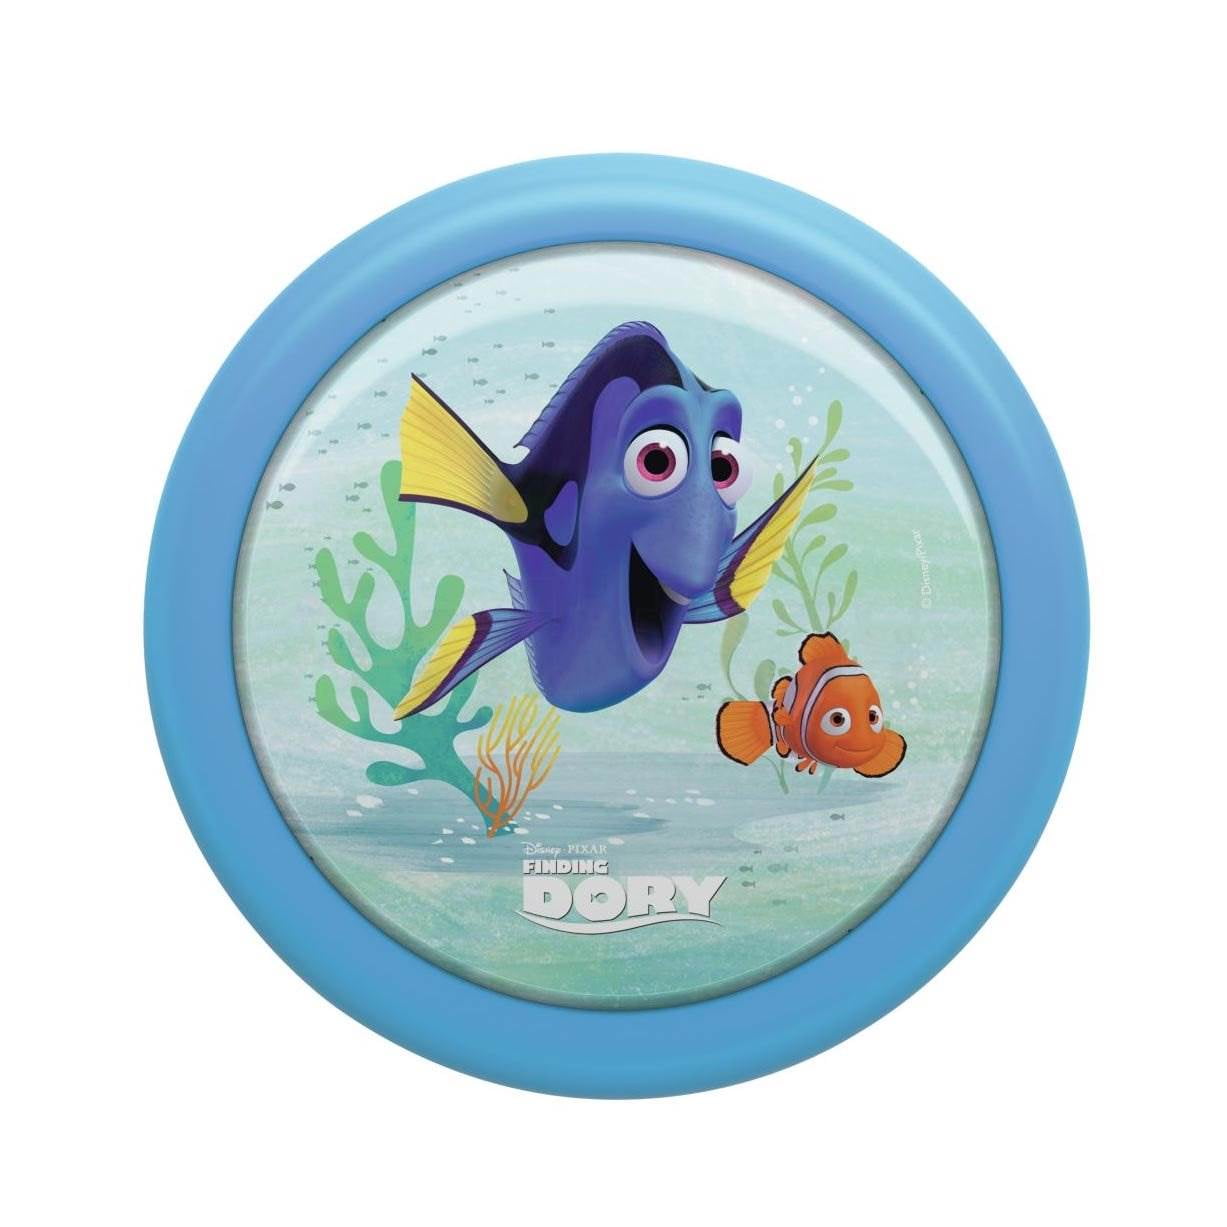 Philips Disney Night Light Projector for Toddlers & Children Star Wars Dory 